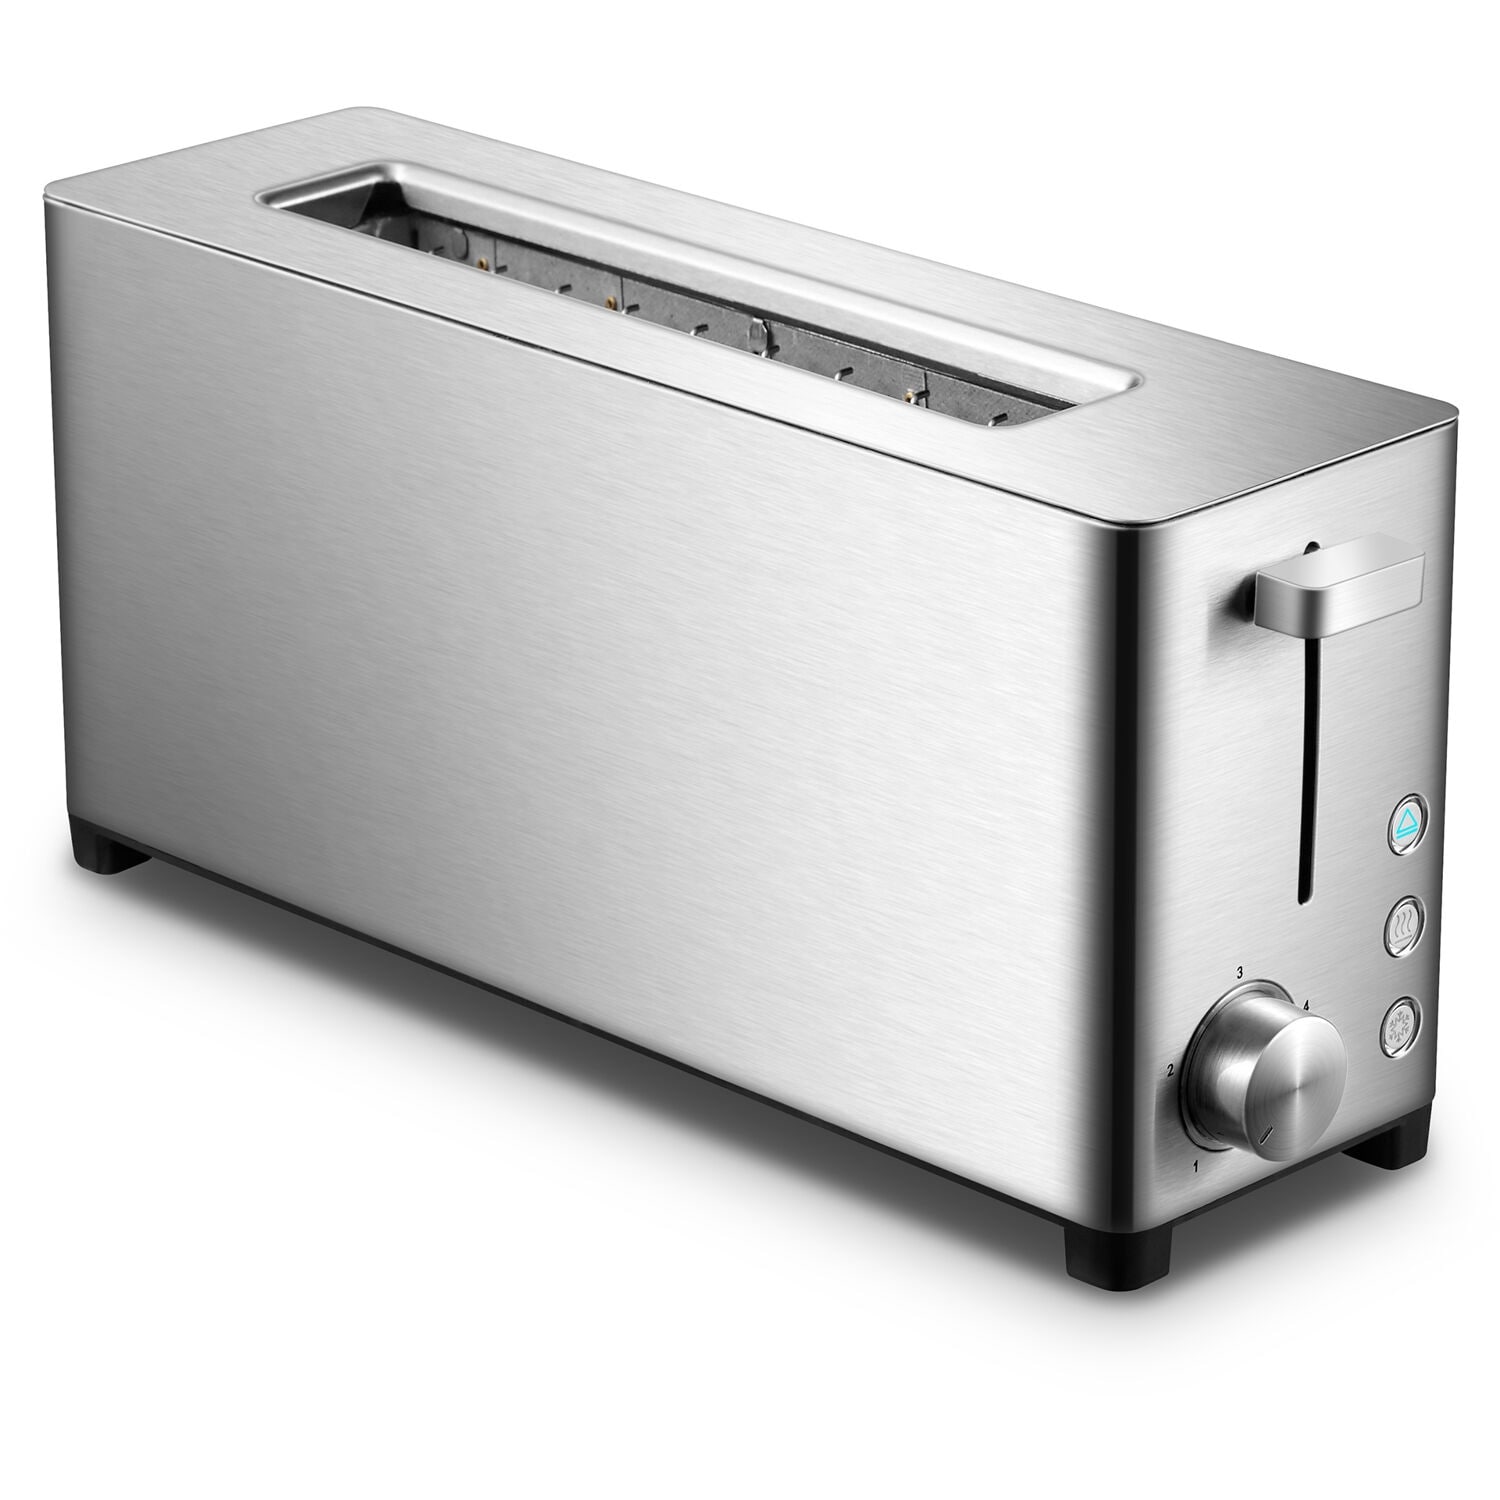 https://ak1.ostkcdn.com/images/products/is/images/direct/d2e1325f165cf32bc9827c28bbce5842191d4a0c/Two-Slice-Wide-Slot-Toaster%2C-Stainless-Steel.jpg